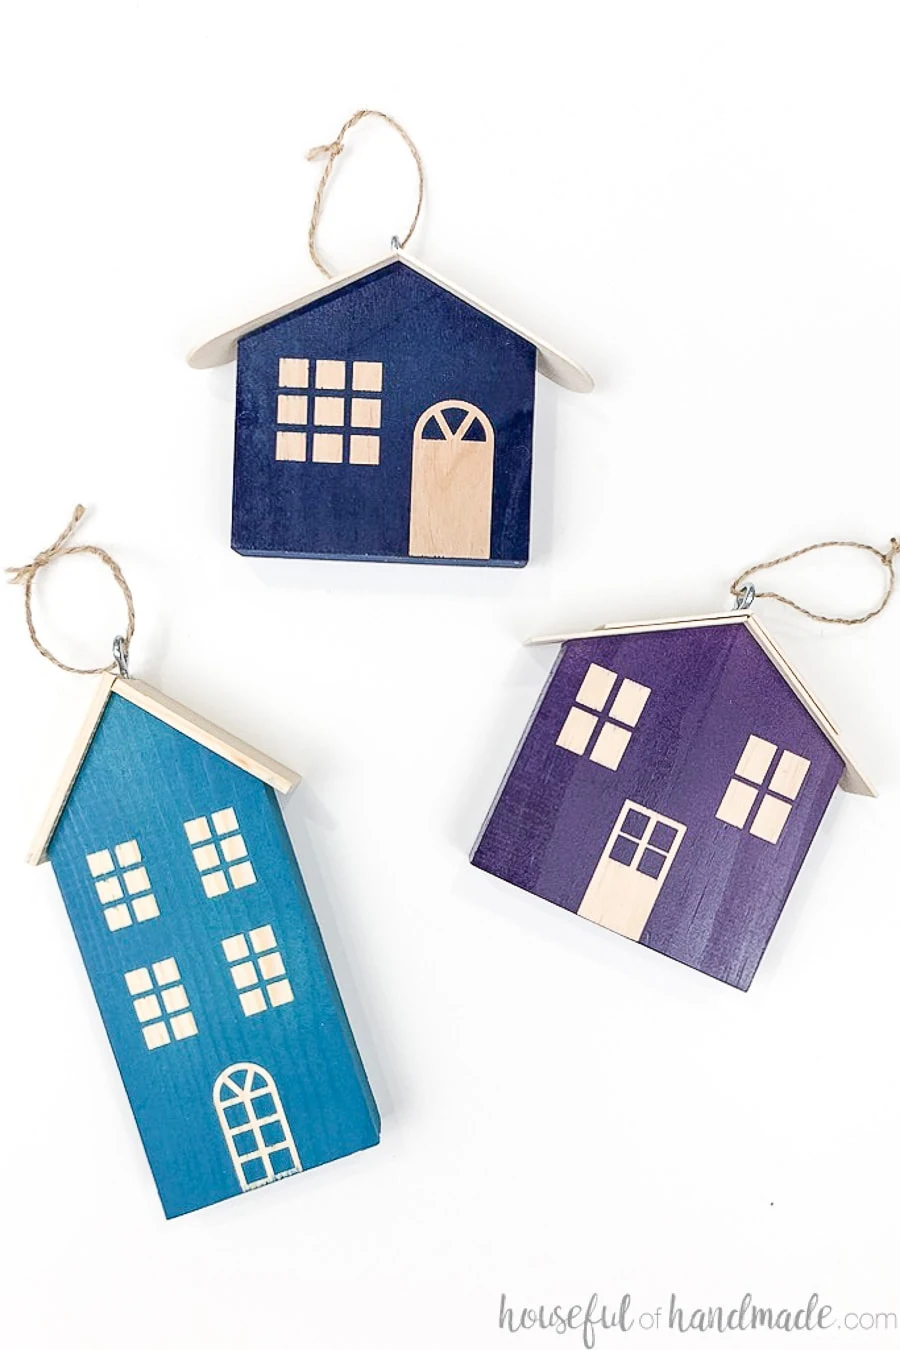 Three wood Christmas houses with eye hooks on the top to hang as ornaments, one turquoise, one navy and one purple, laying on a white background.